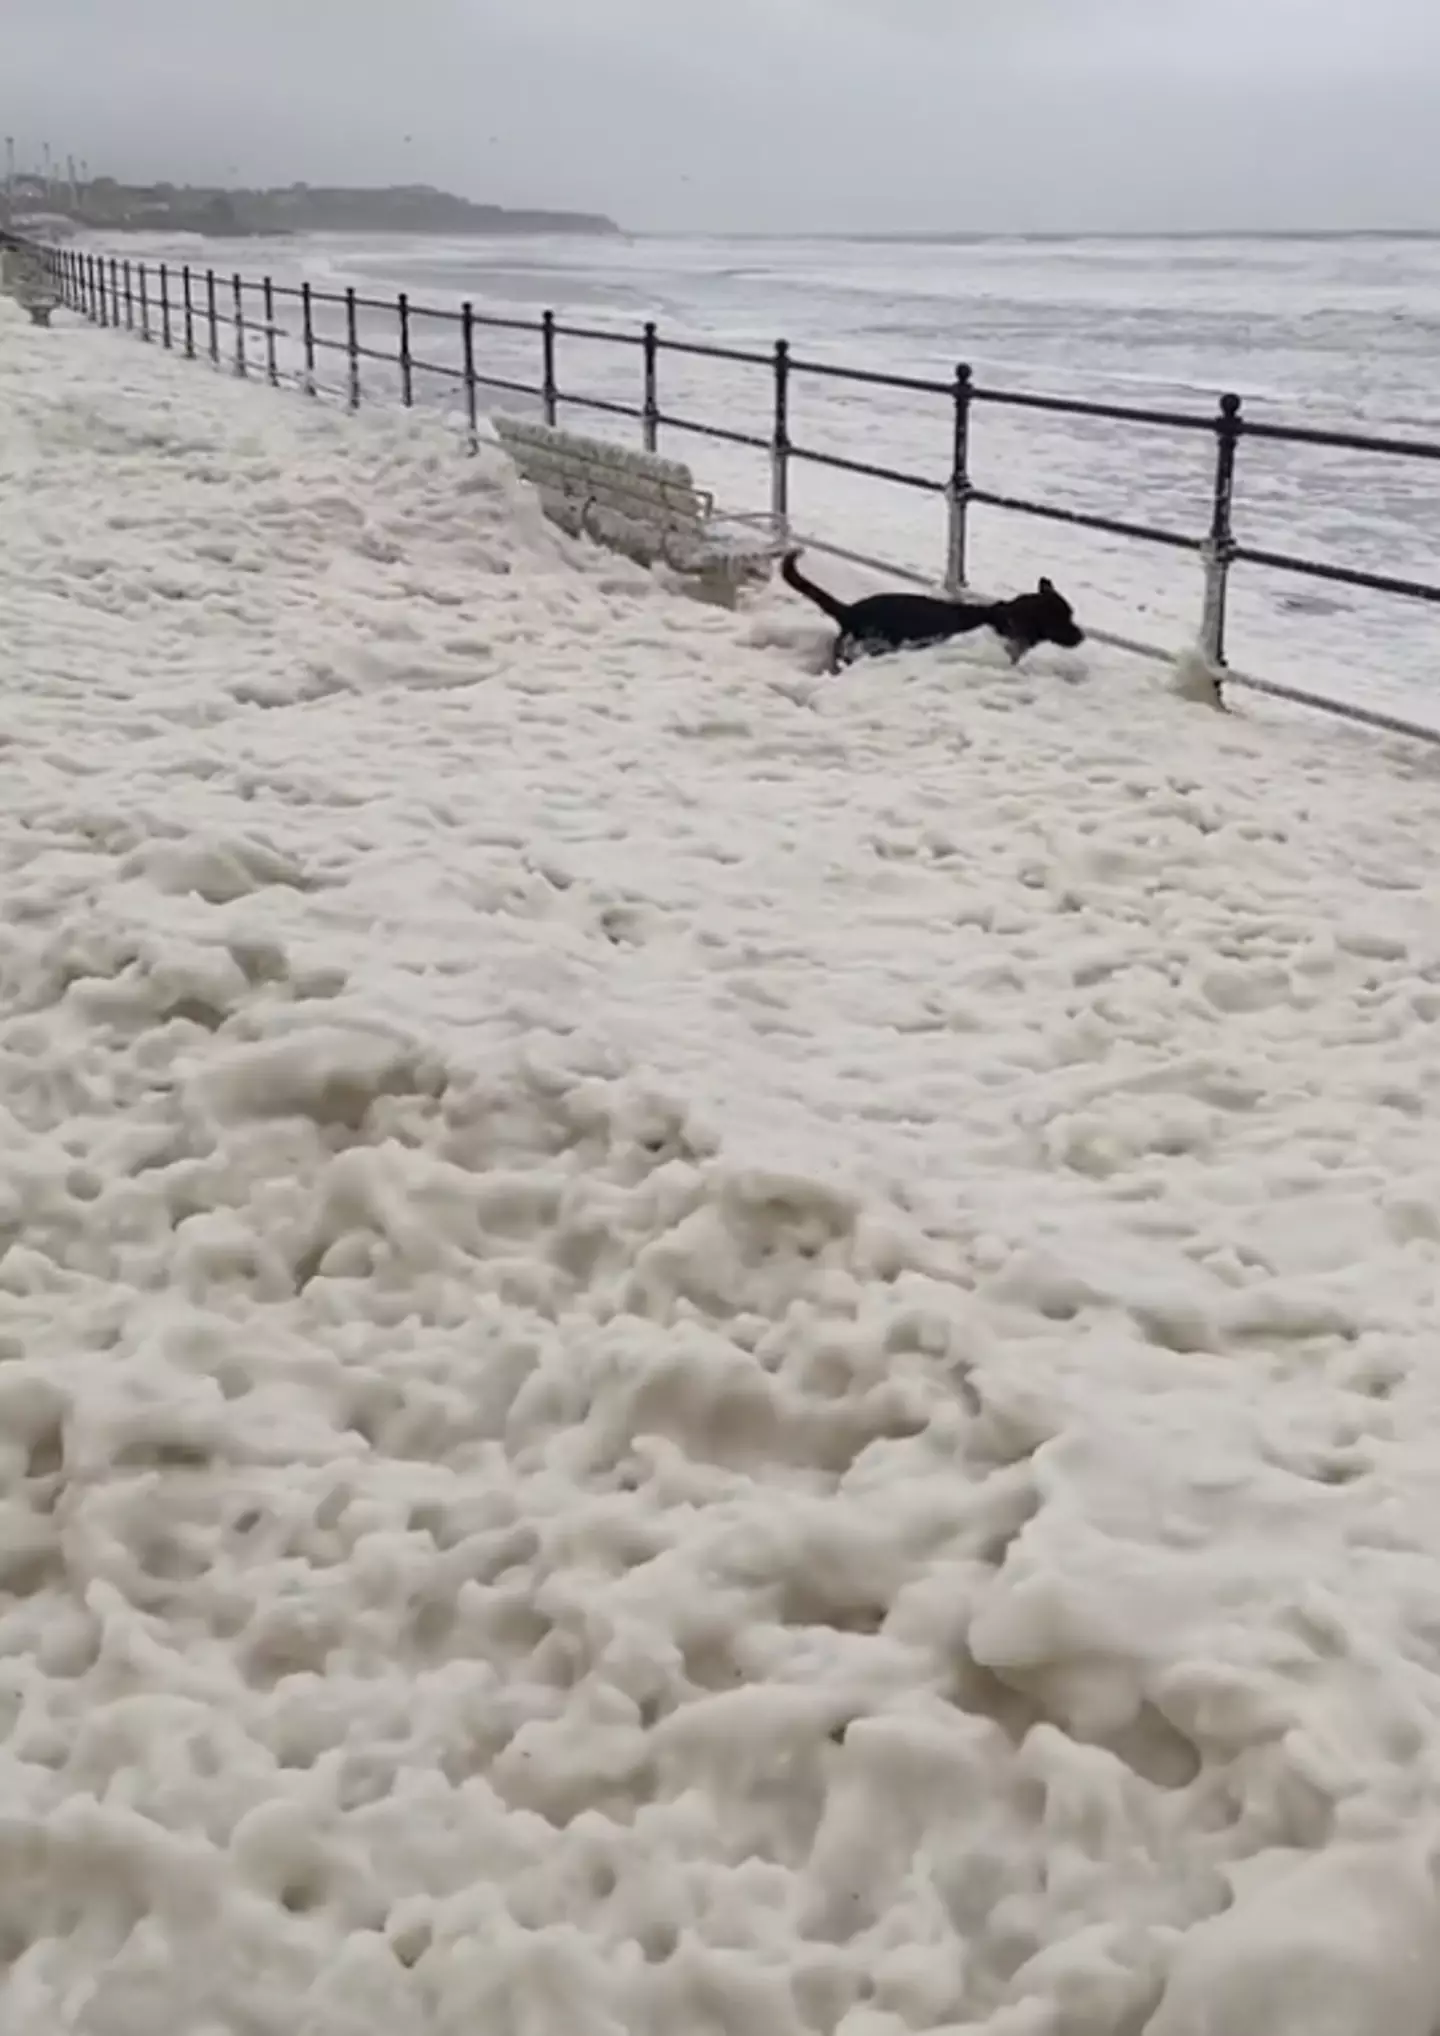 Videos are emerging on social media, appearing to show a 'cloud of foam' - that looks a bit like snow - in common coastal locations across the UK.